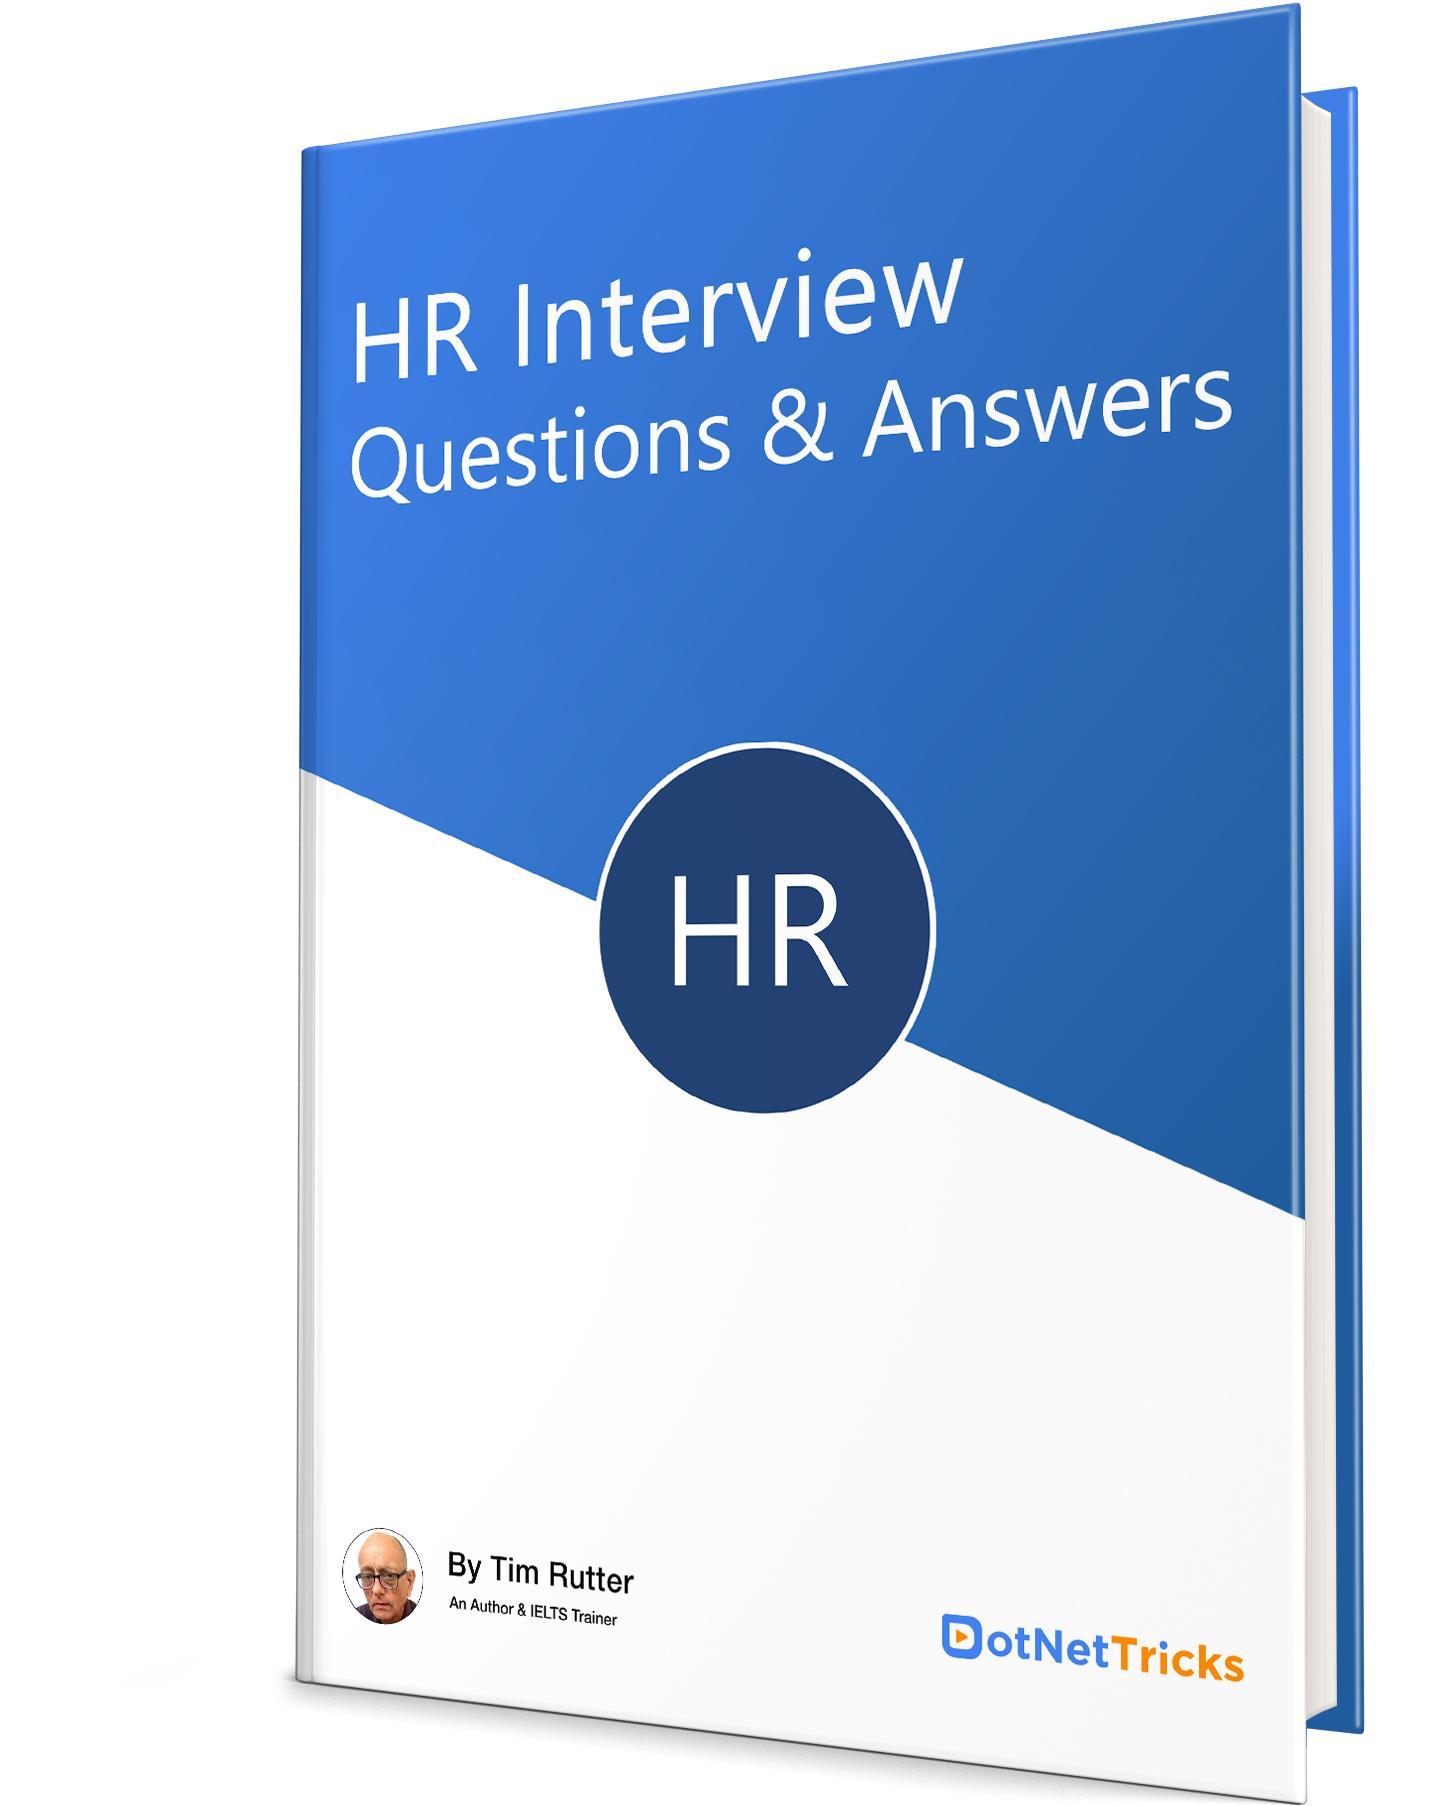 HR Interview Questions & Answers eBook